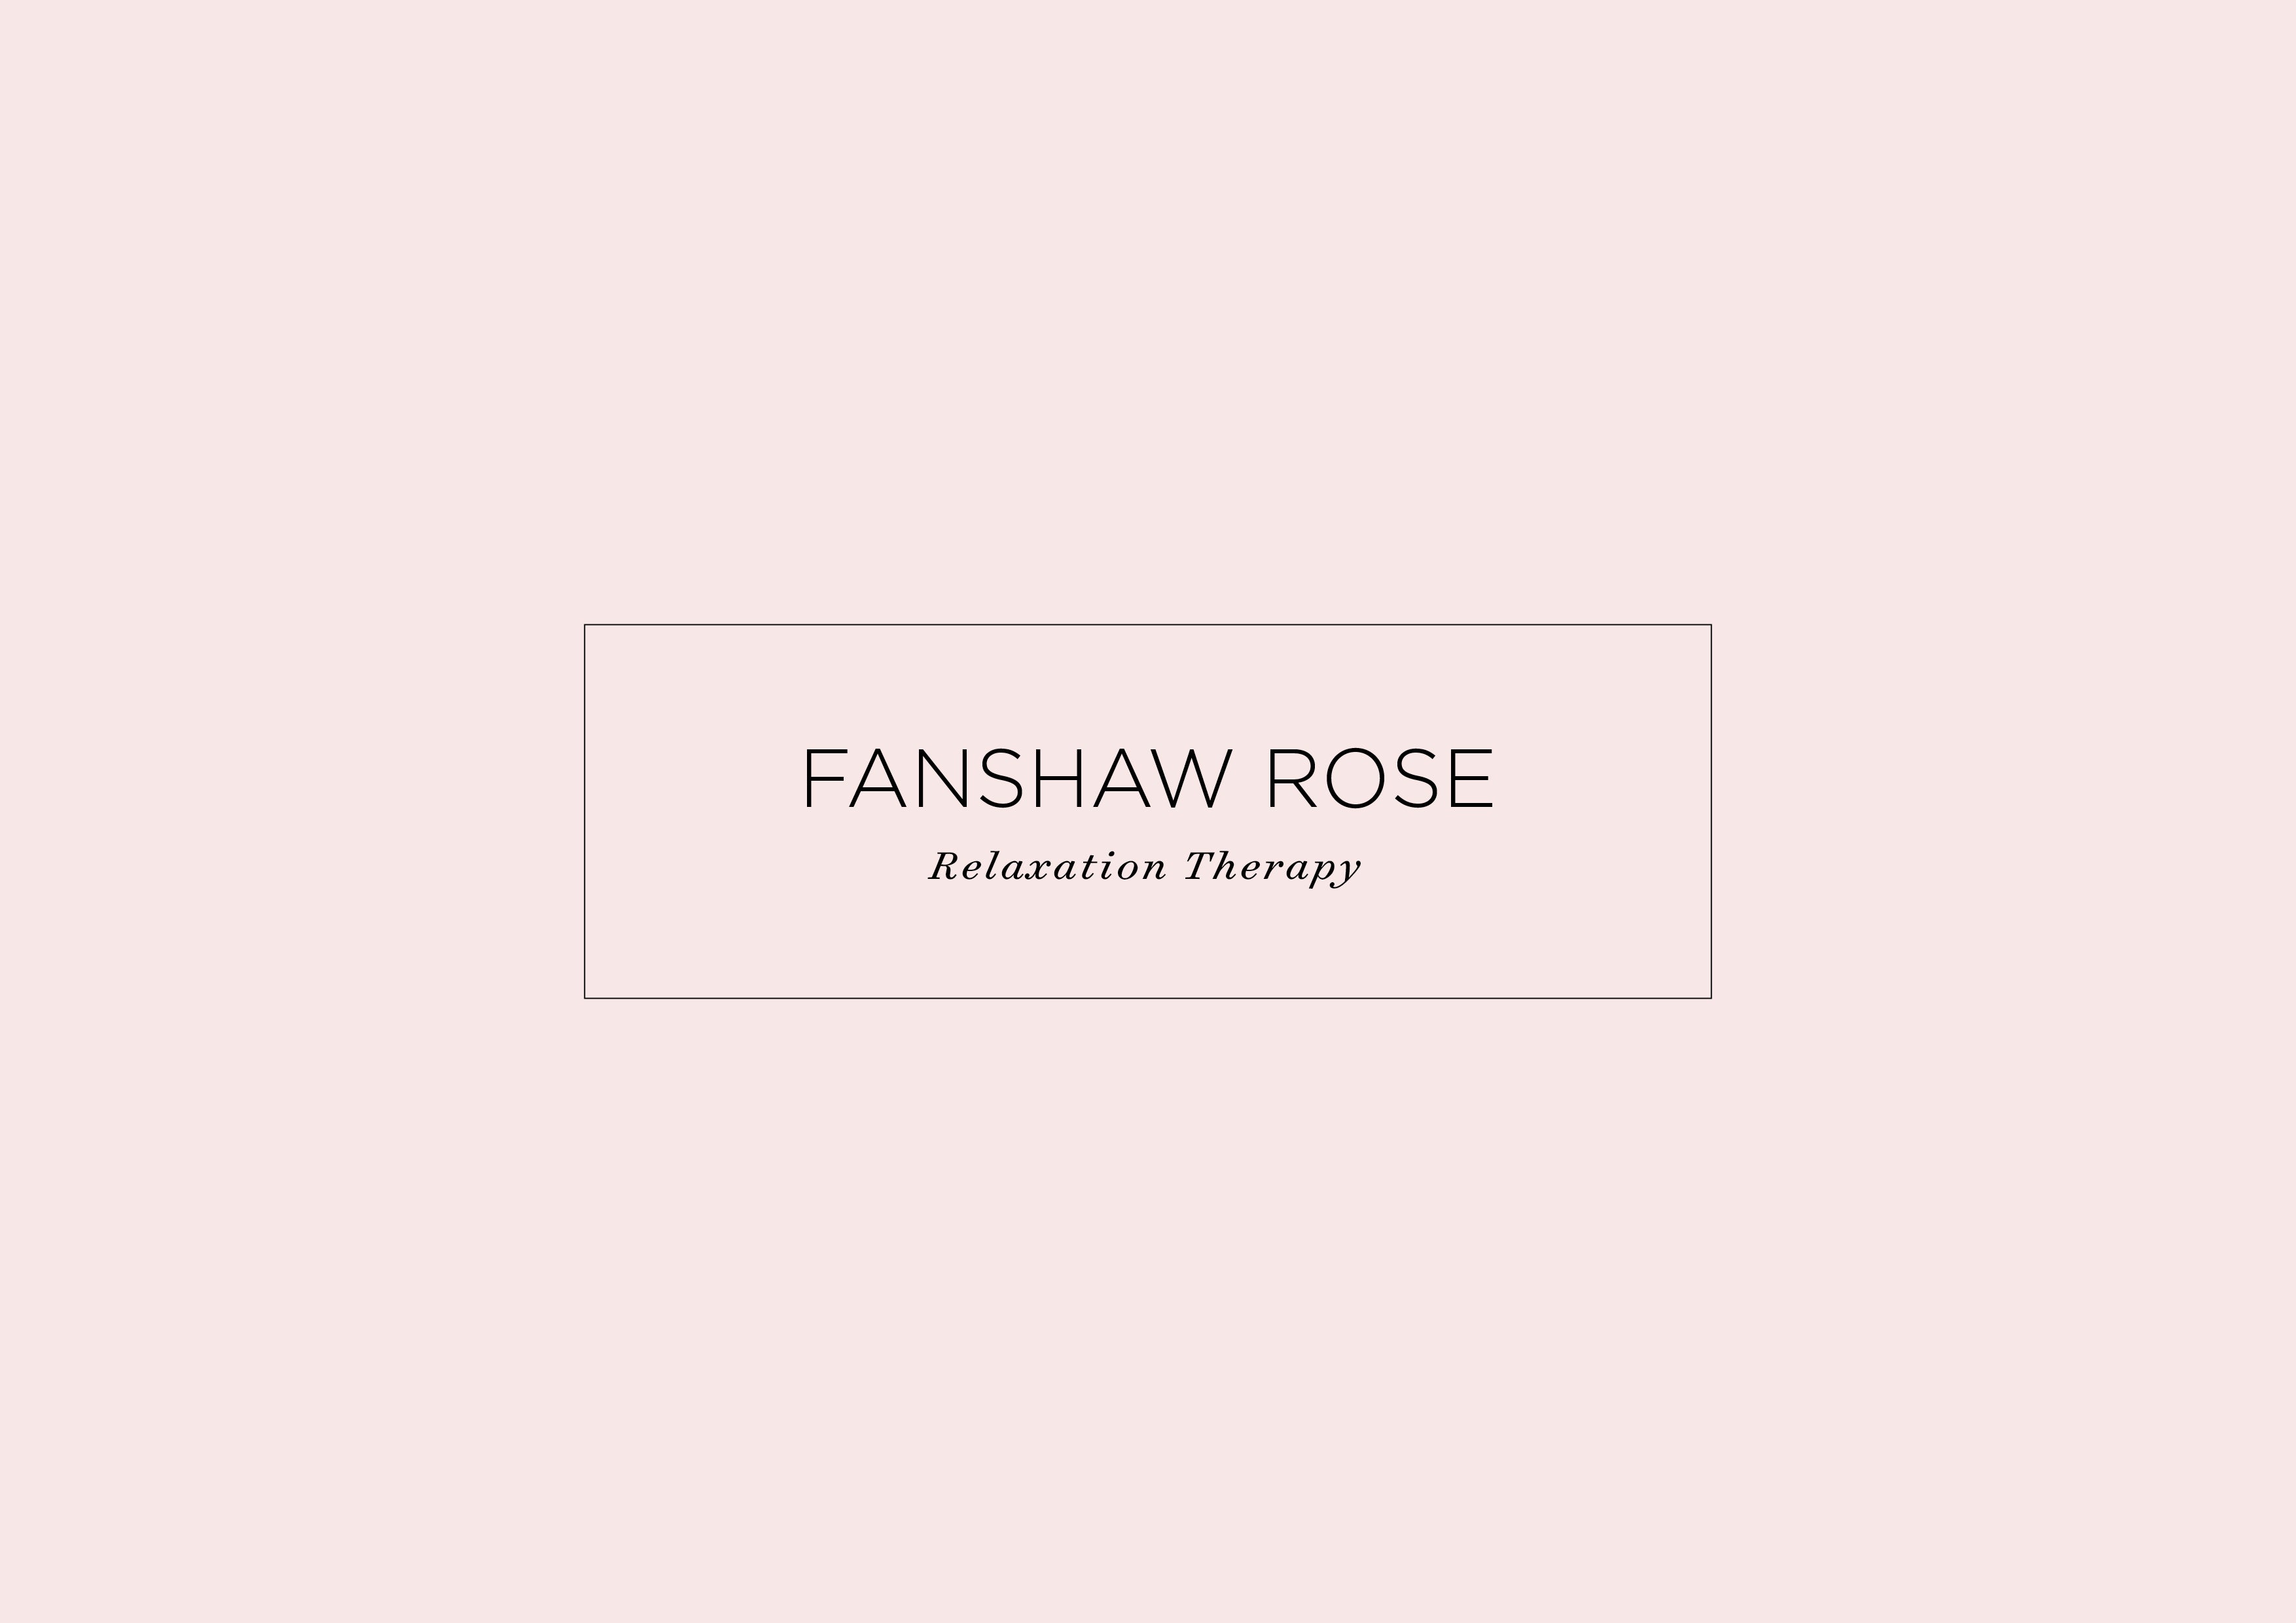 Logo Design and Business Cards for Fanshaw Rose